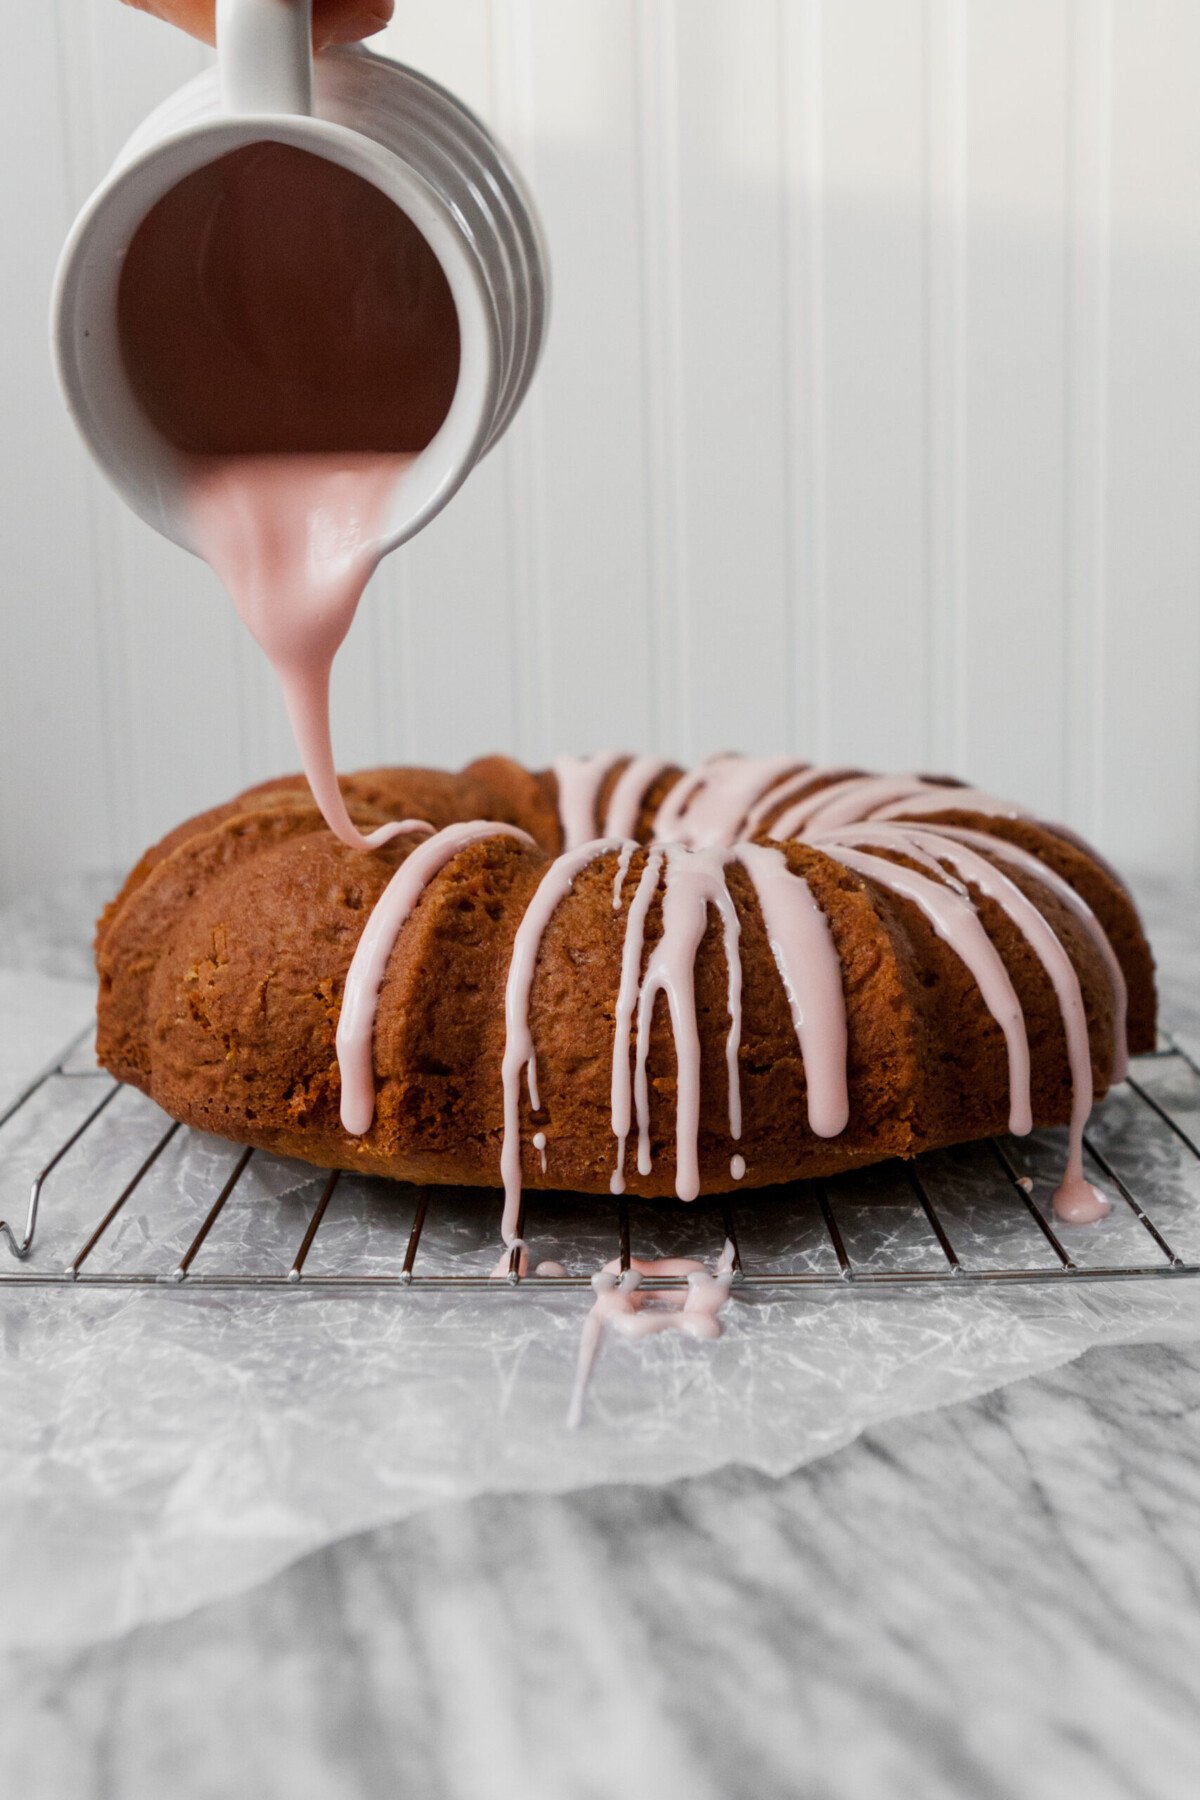 Tender bundt cake flavored with fresh grapefruit and Campari. This cake is naturally sweetened with honey, easy to whip, and elegant enough for a fancy party. | from Lauren Grant of Zestful Kitchen